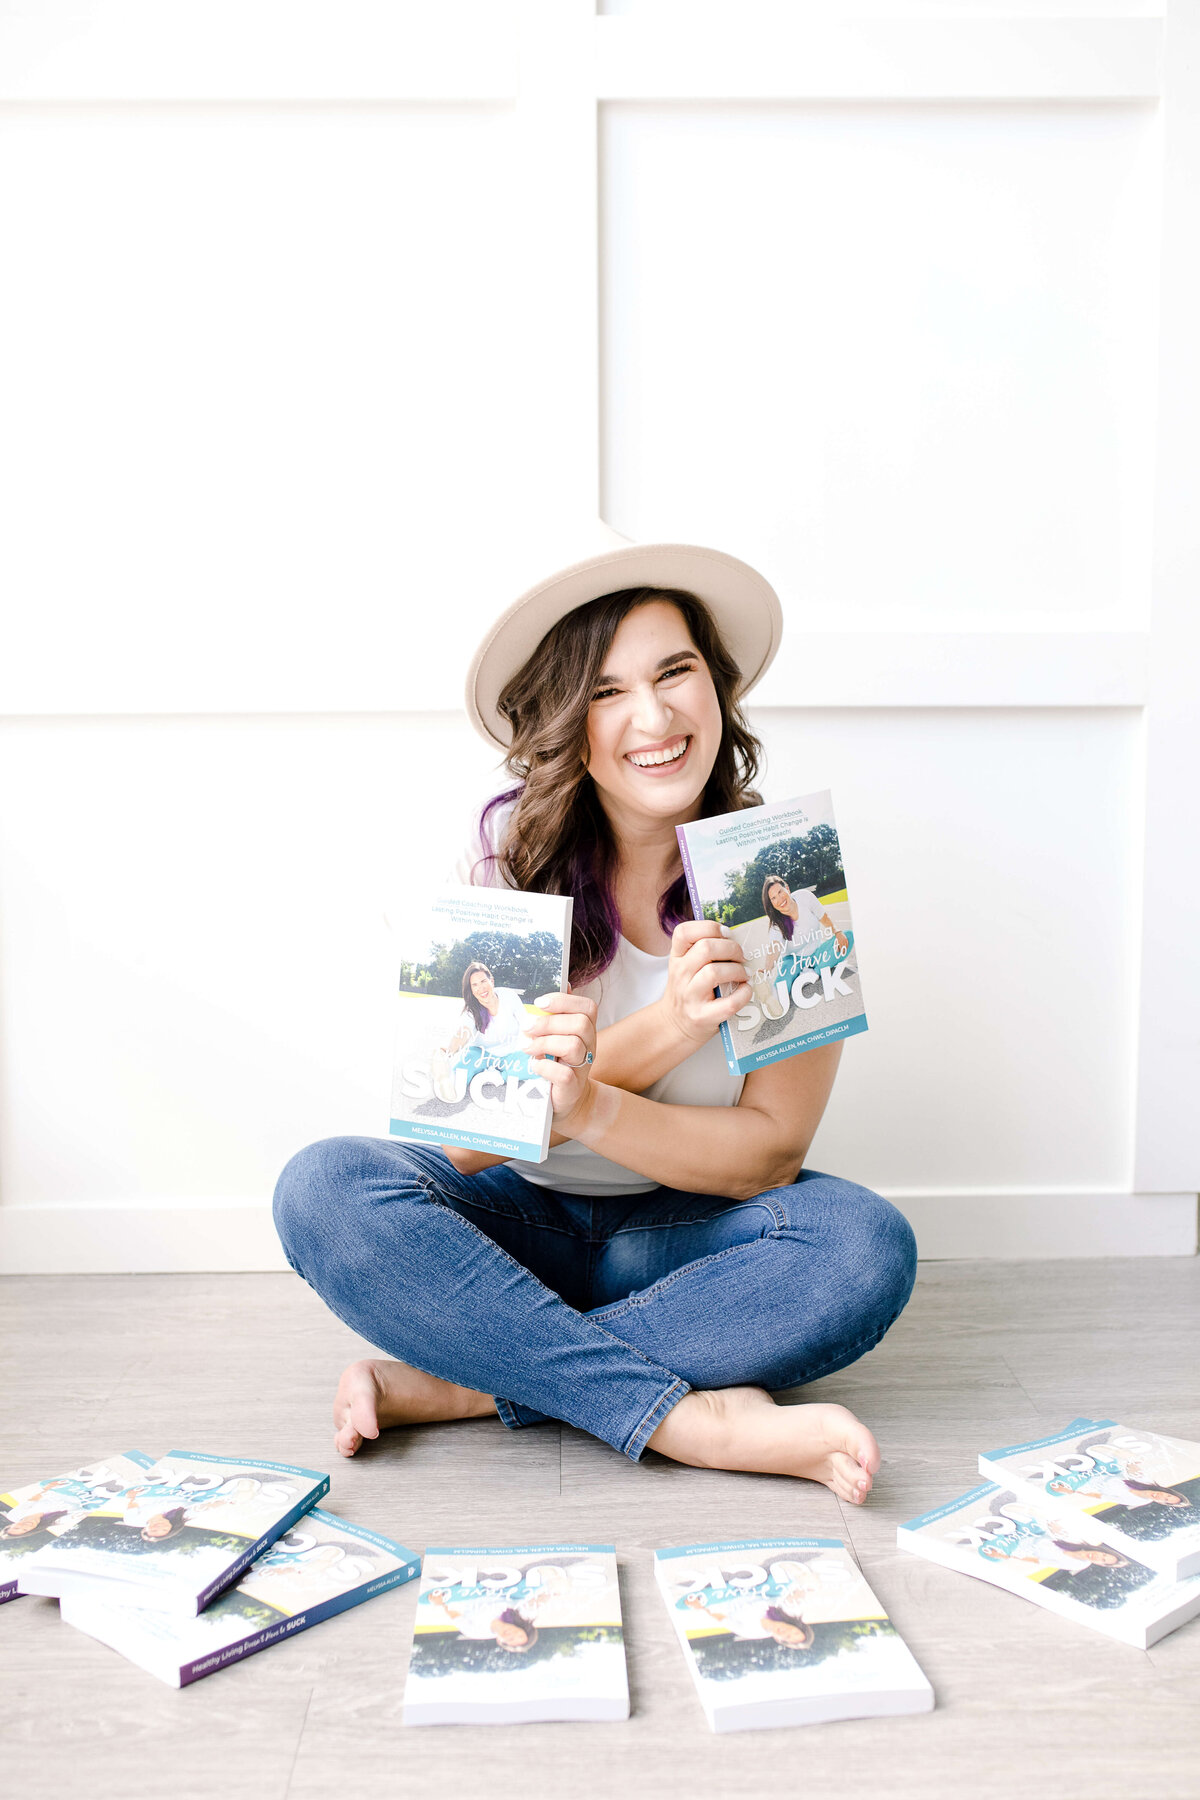 Brand photo shoot ideas for an author with woman sitting behind a pile of books while holding two of the books up to show her new book as she smiles while wearing a wide brimmed hat